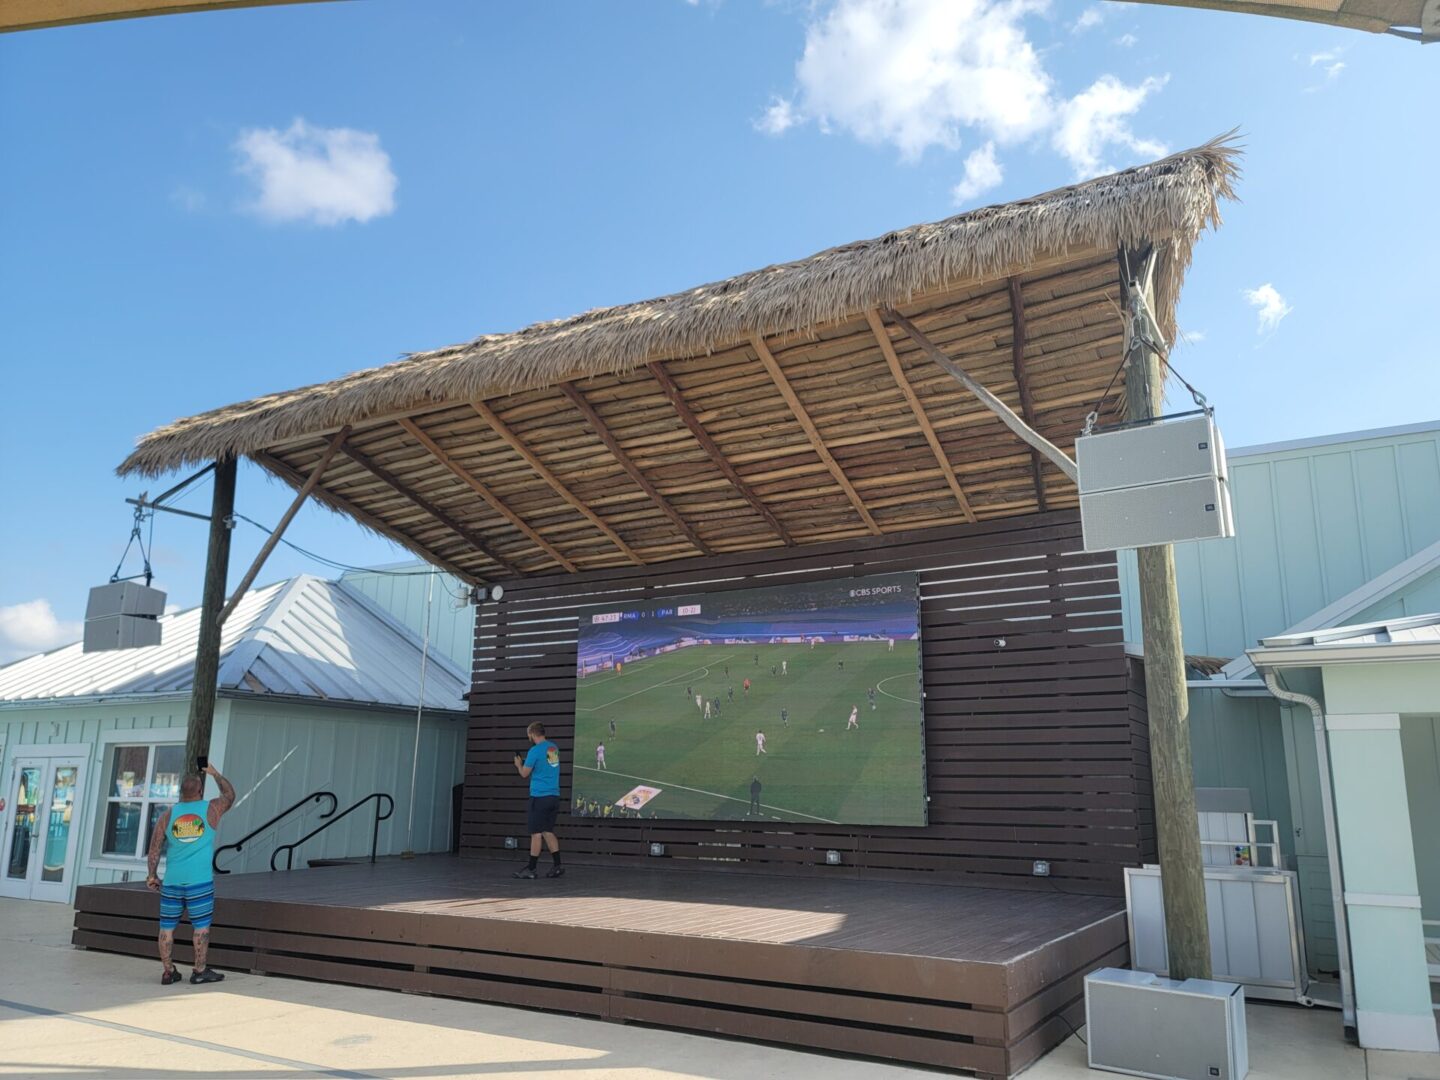 A large screen showing a soccer game on a deck.